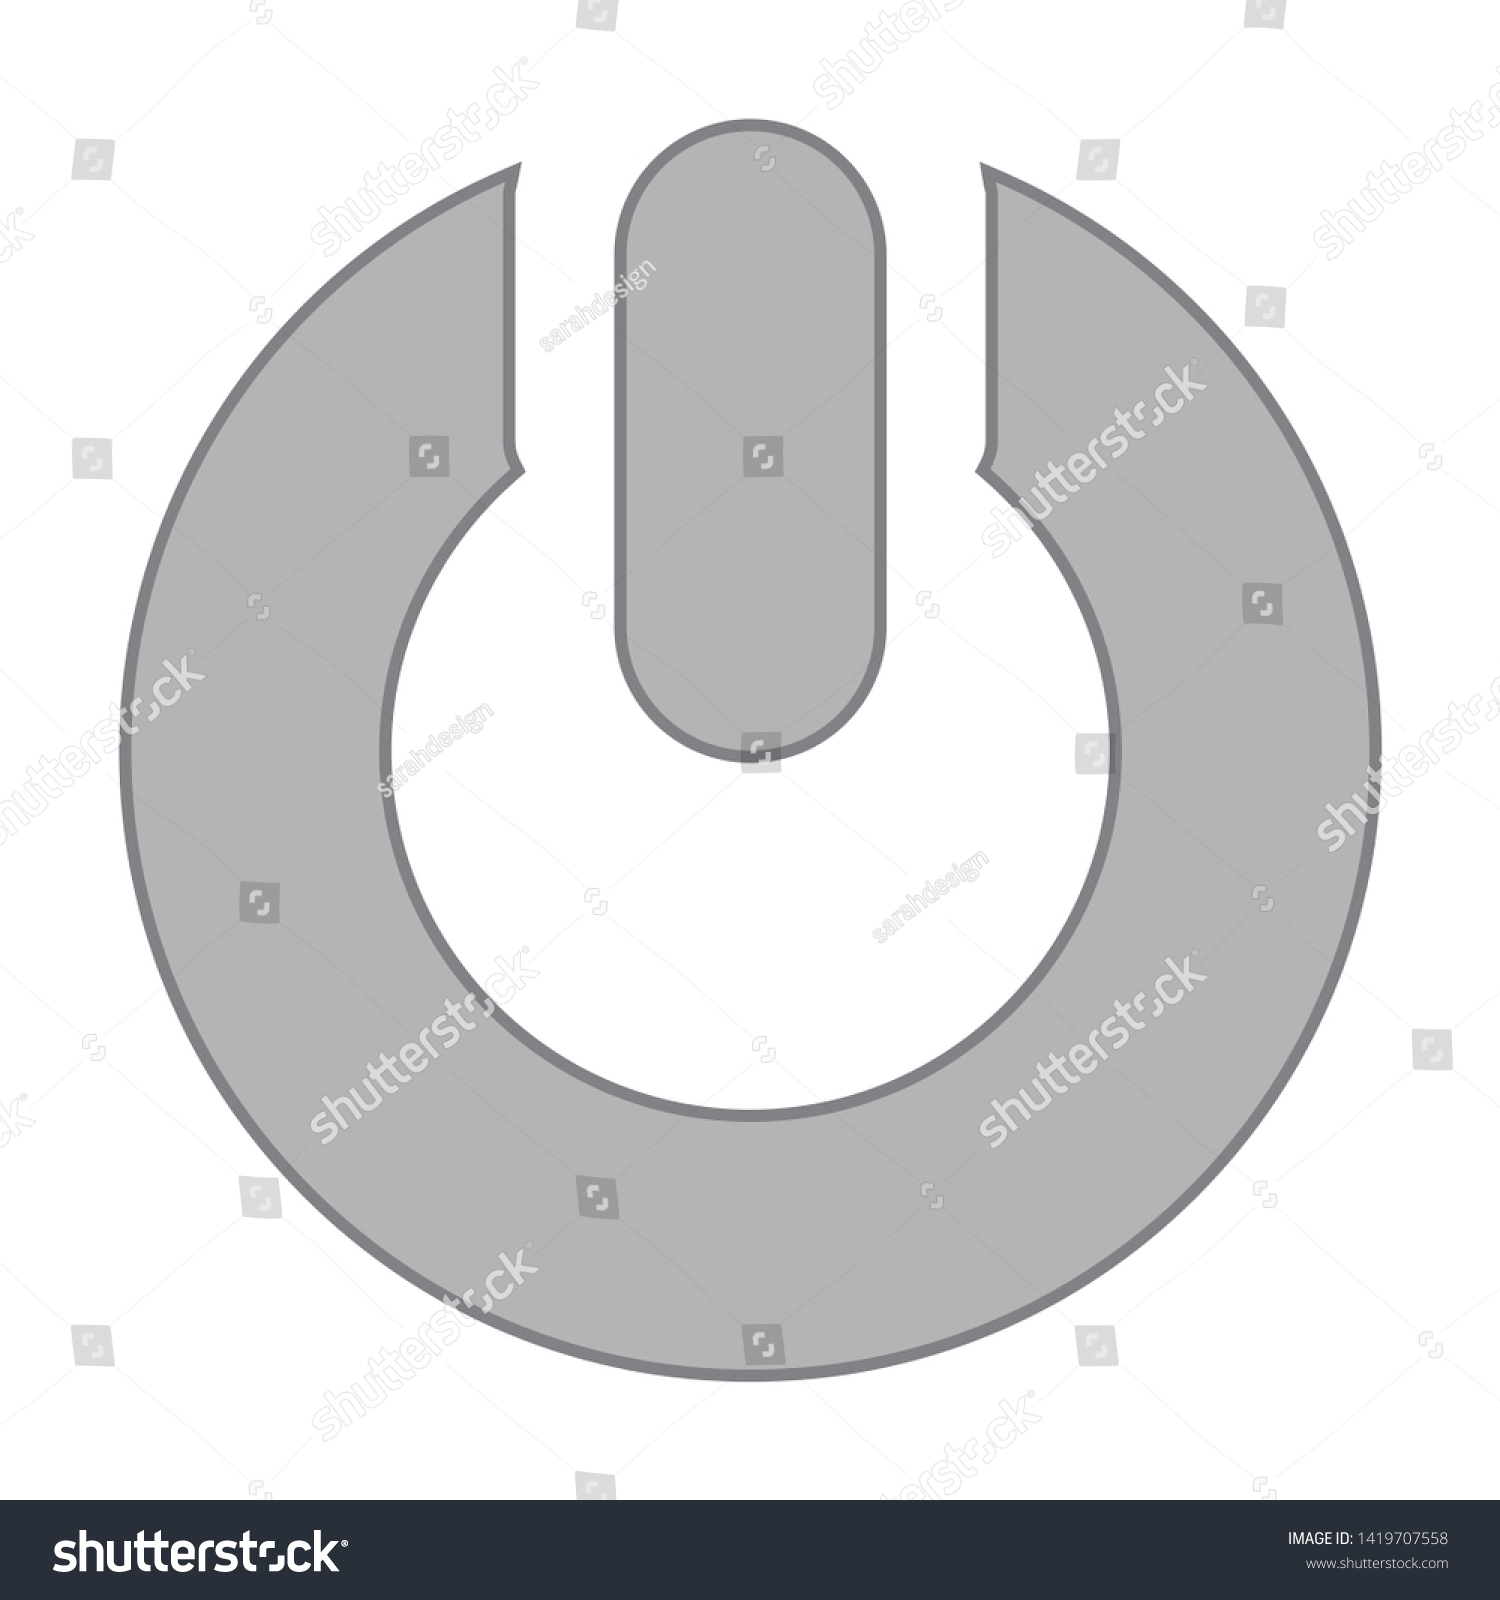  power button icon. flat illustration of  power button vector icon for web #1419707558